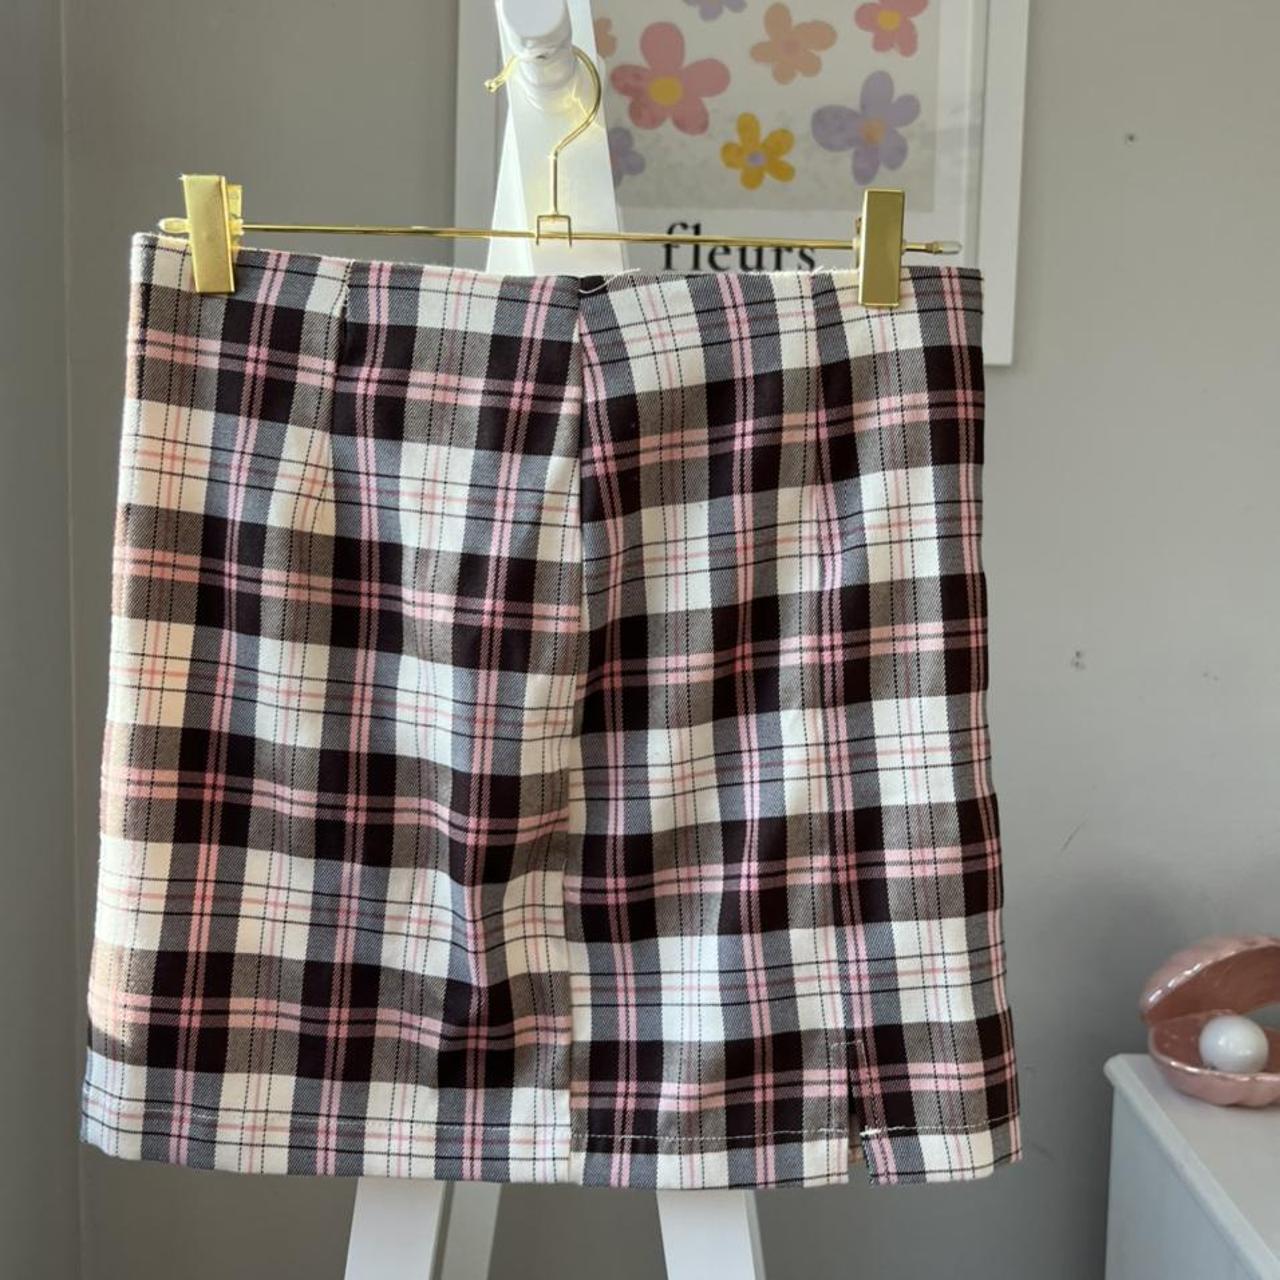 Dizzy Lizzy Women's Brown and Pink Skirt